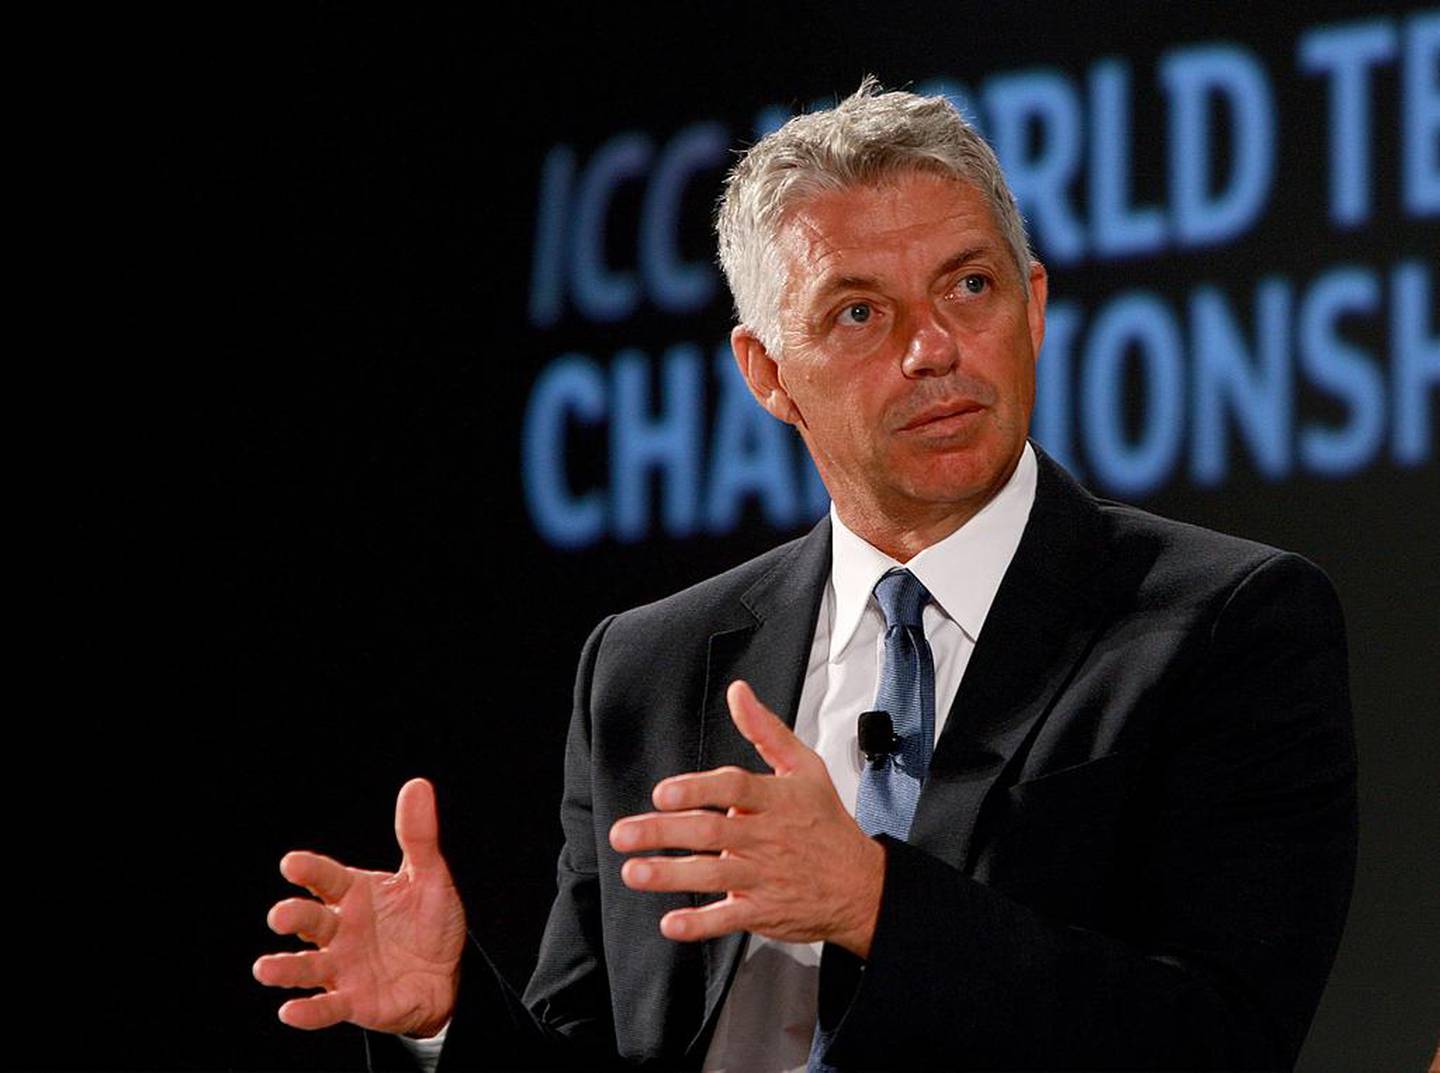 ICC chief executive David Richardson says it is time for cricket to have a hard look at itself. Satish Kumar / The National